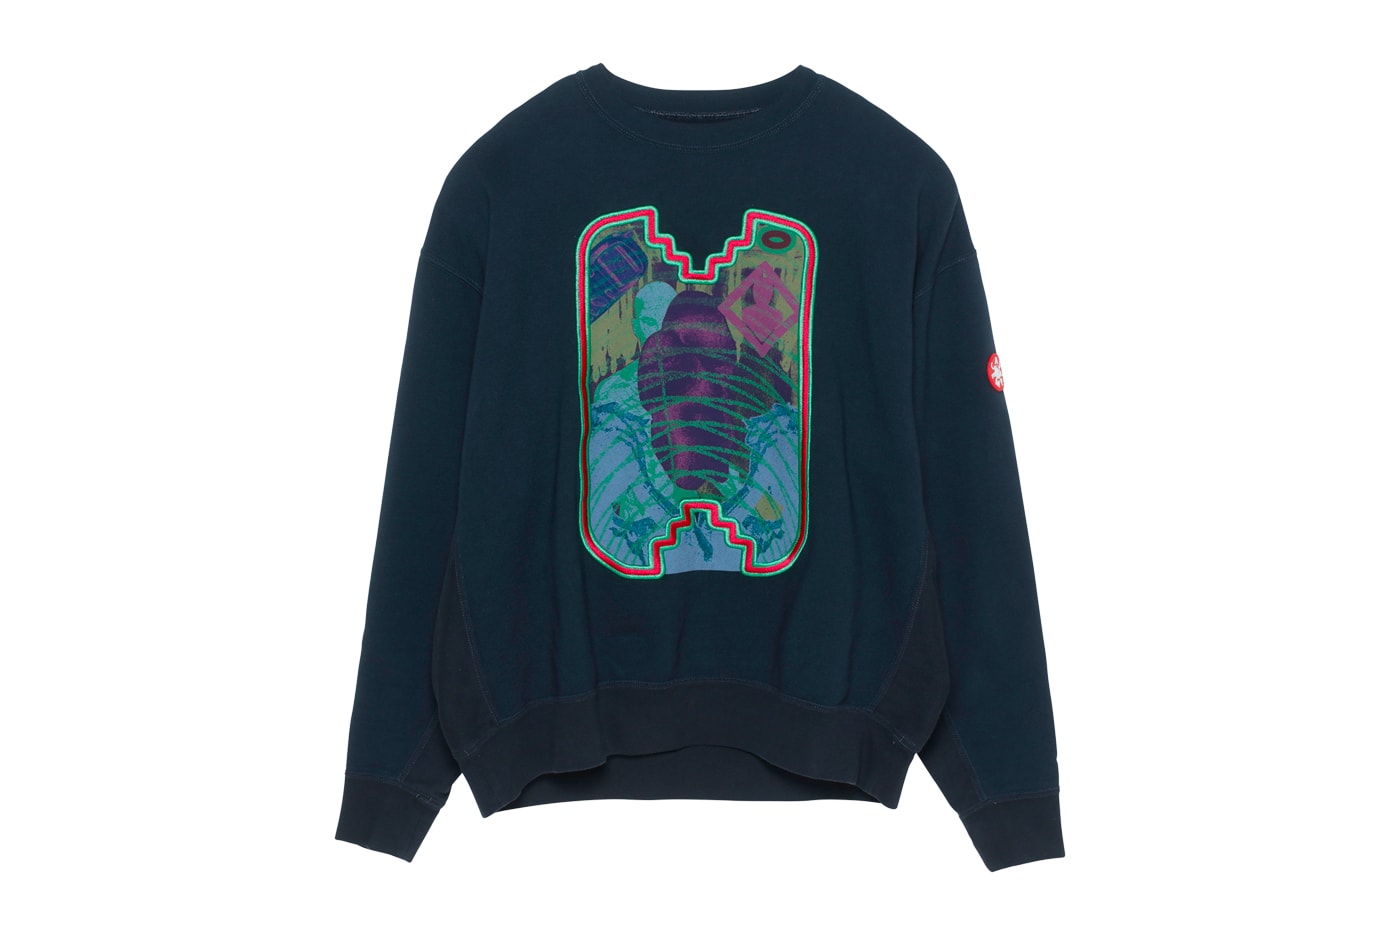 Cav Empt Spring Summer 2020 Drop Five sk8thing toby feltwell tokyo japanese designer label graphics t shirts jackets coats streetwear menswear sweaters pants hoodies trousers